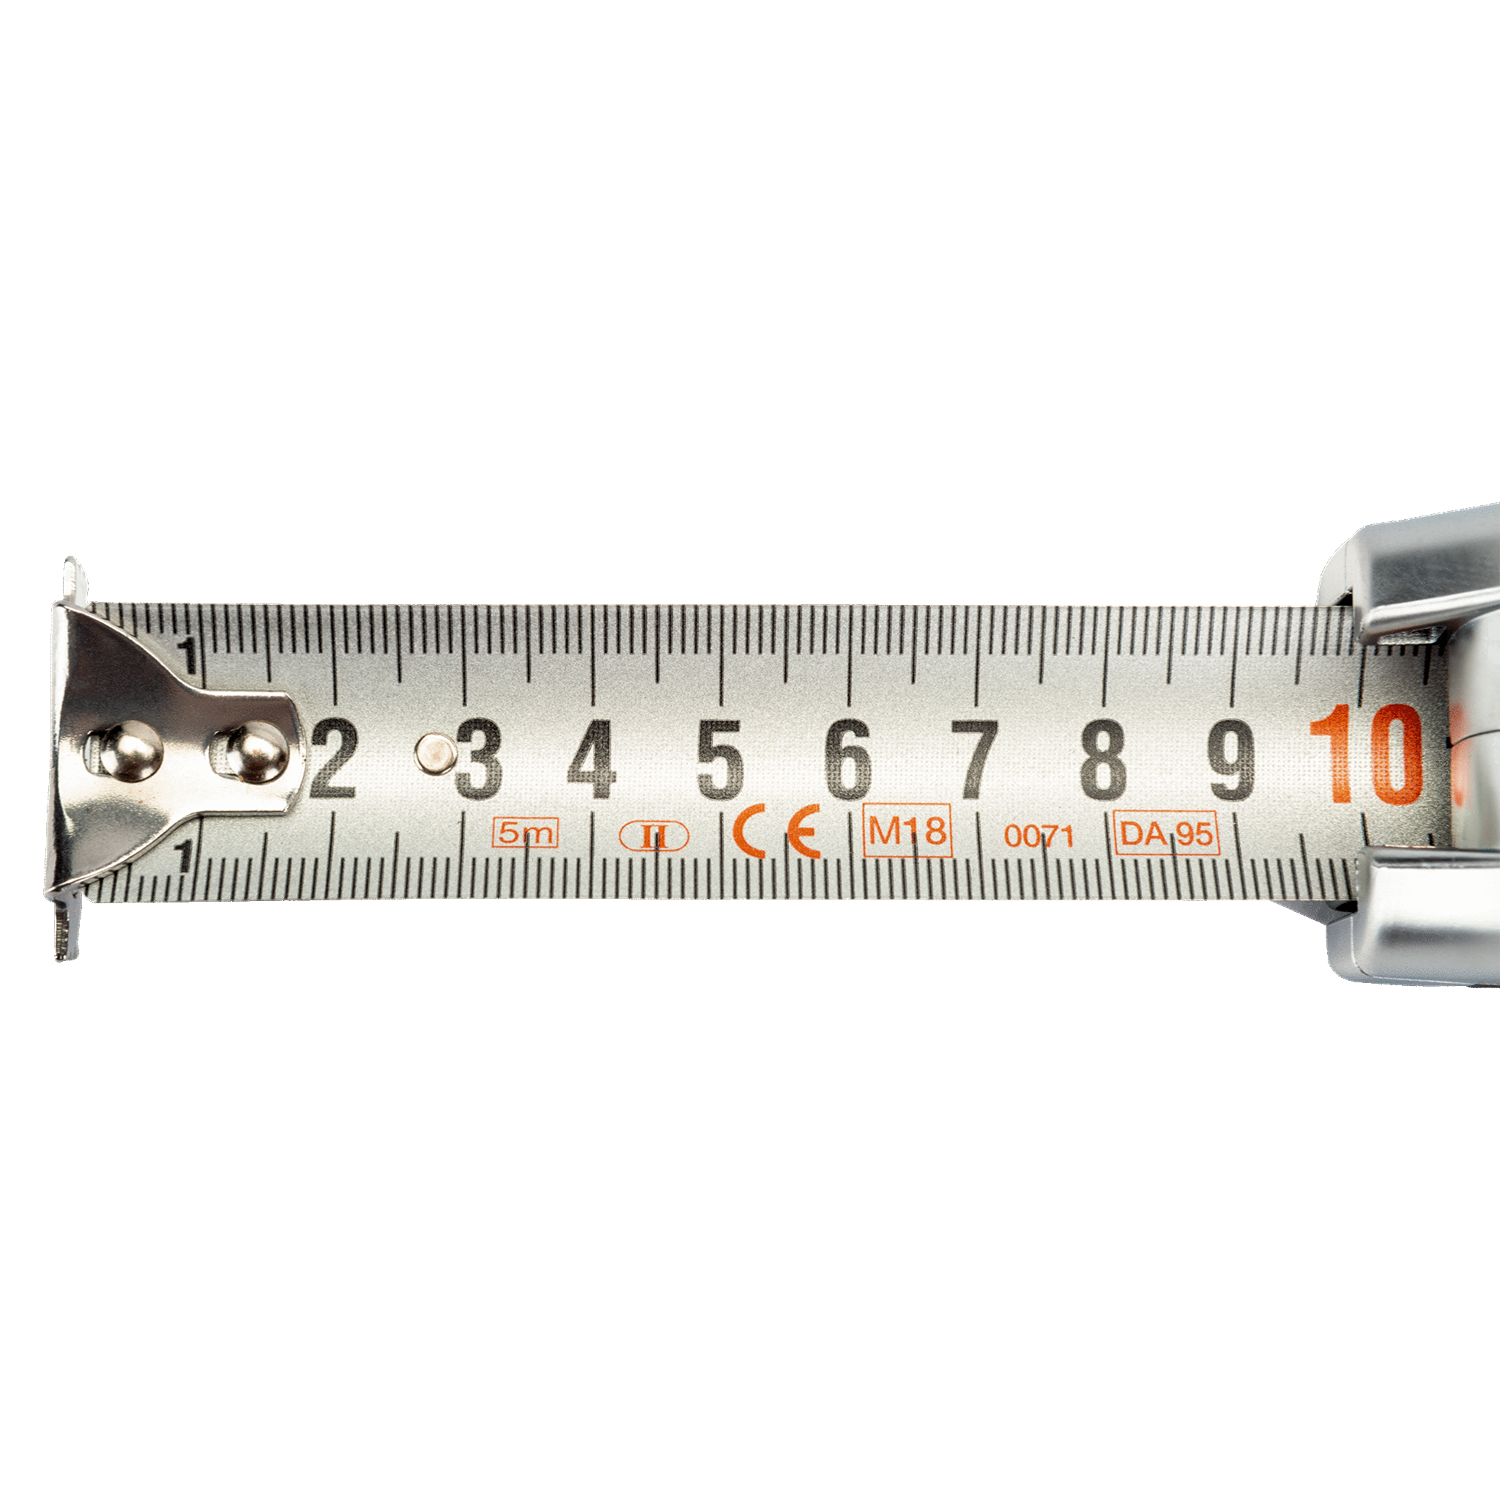 BAHCO MTS Double-Sided Measuring Tape with Rubber Grip - Premium Measuring Tape from BAHCO - Shop now at Yew Aik.